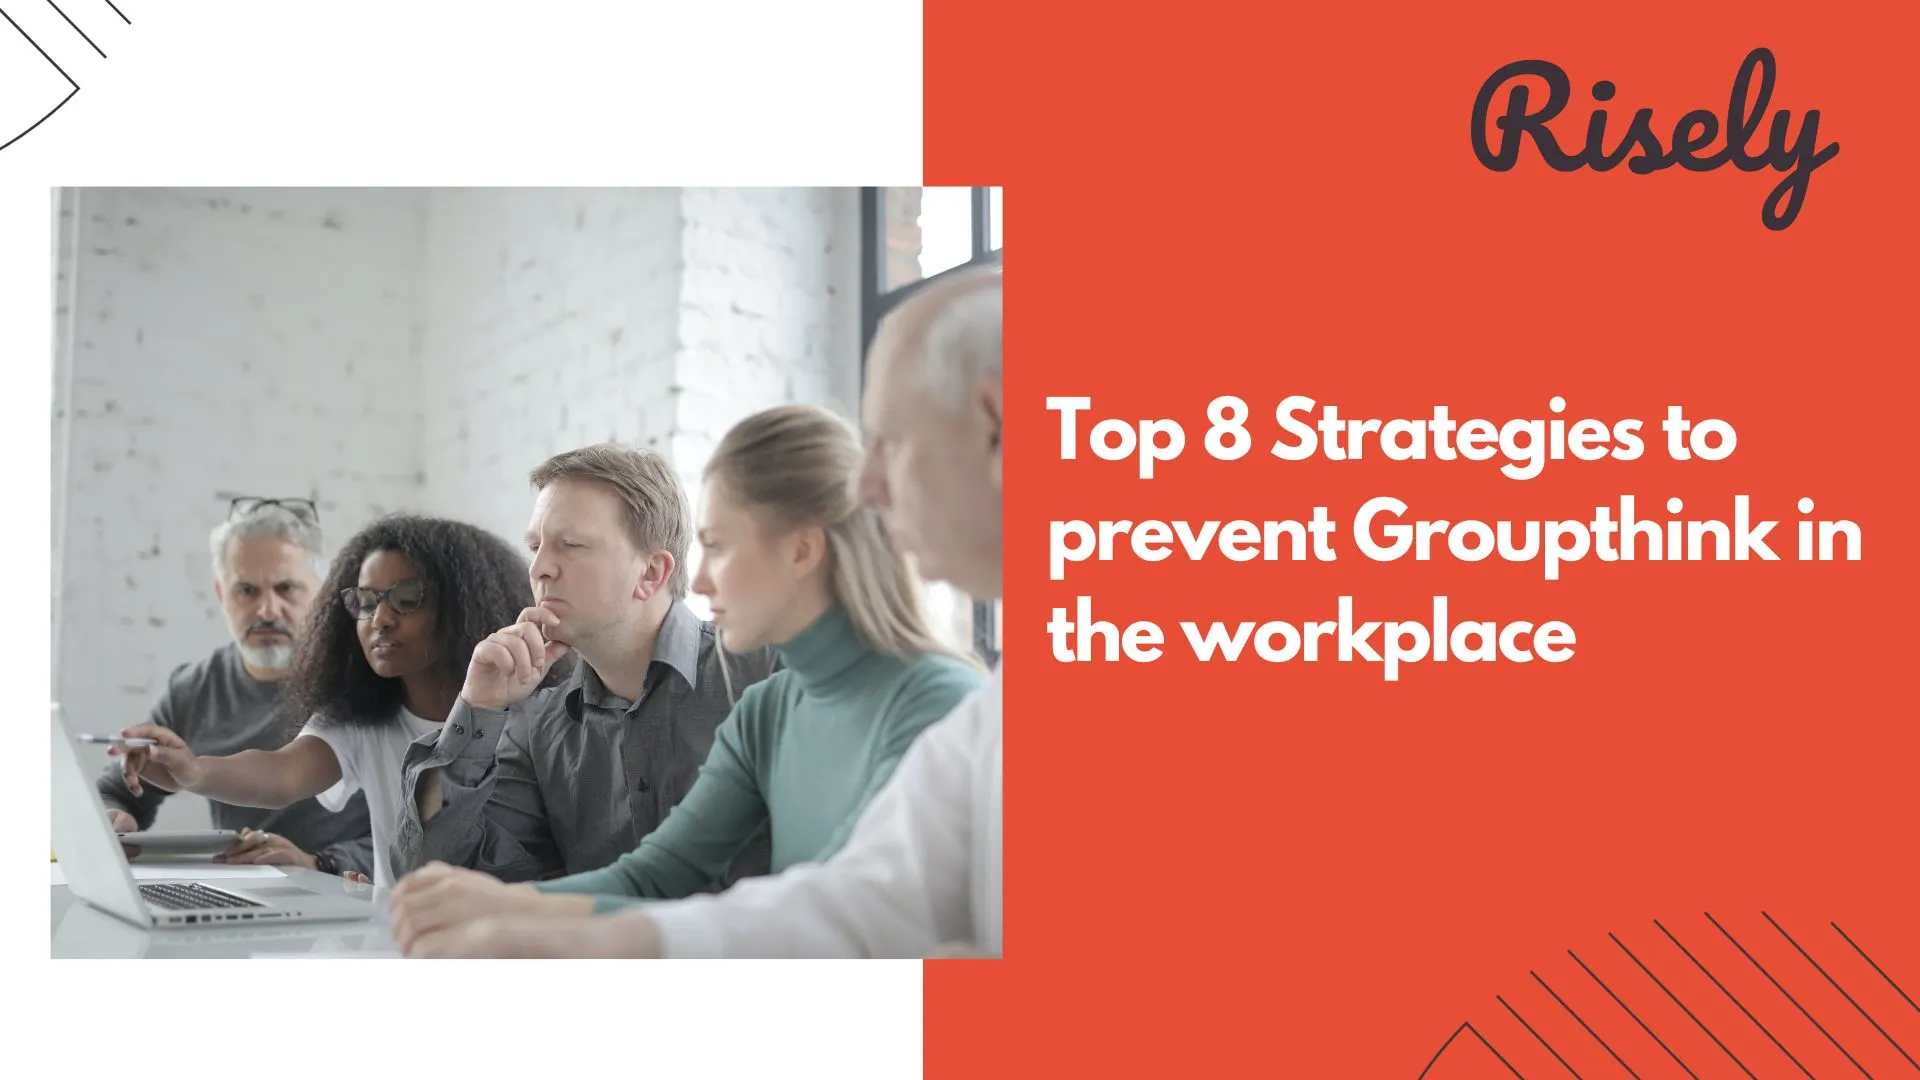 Top 8 Strategies to prevent Groupthink in the workplace